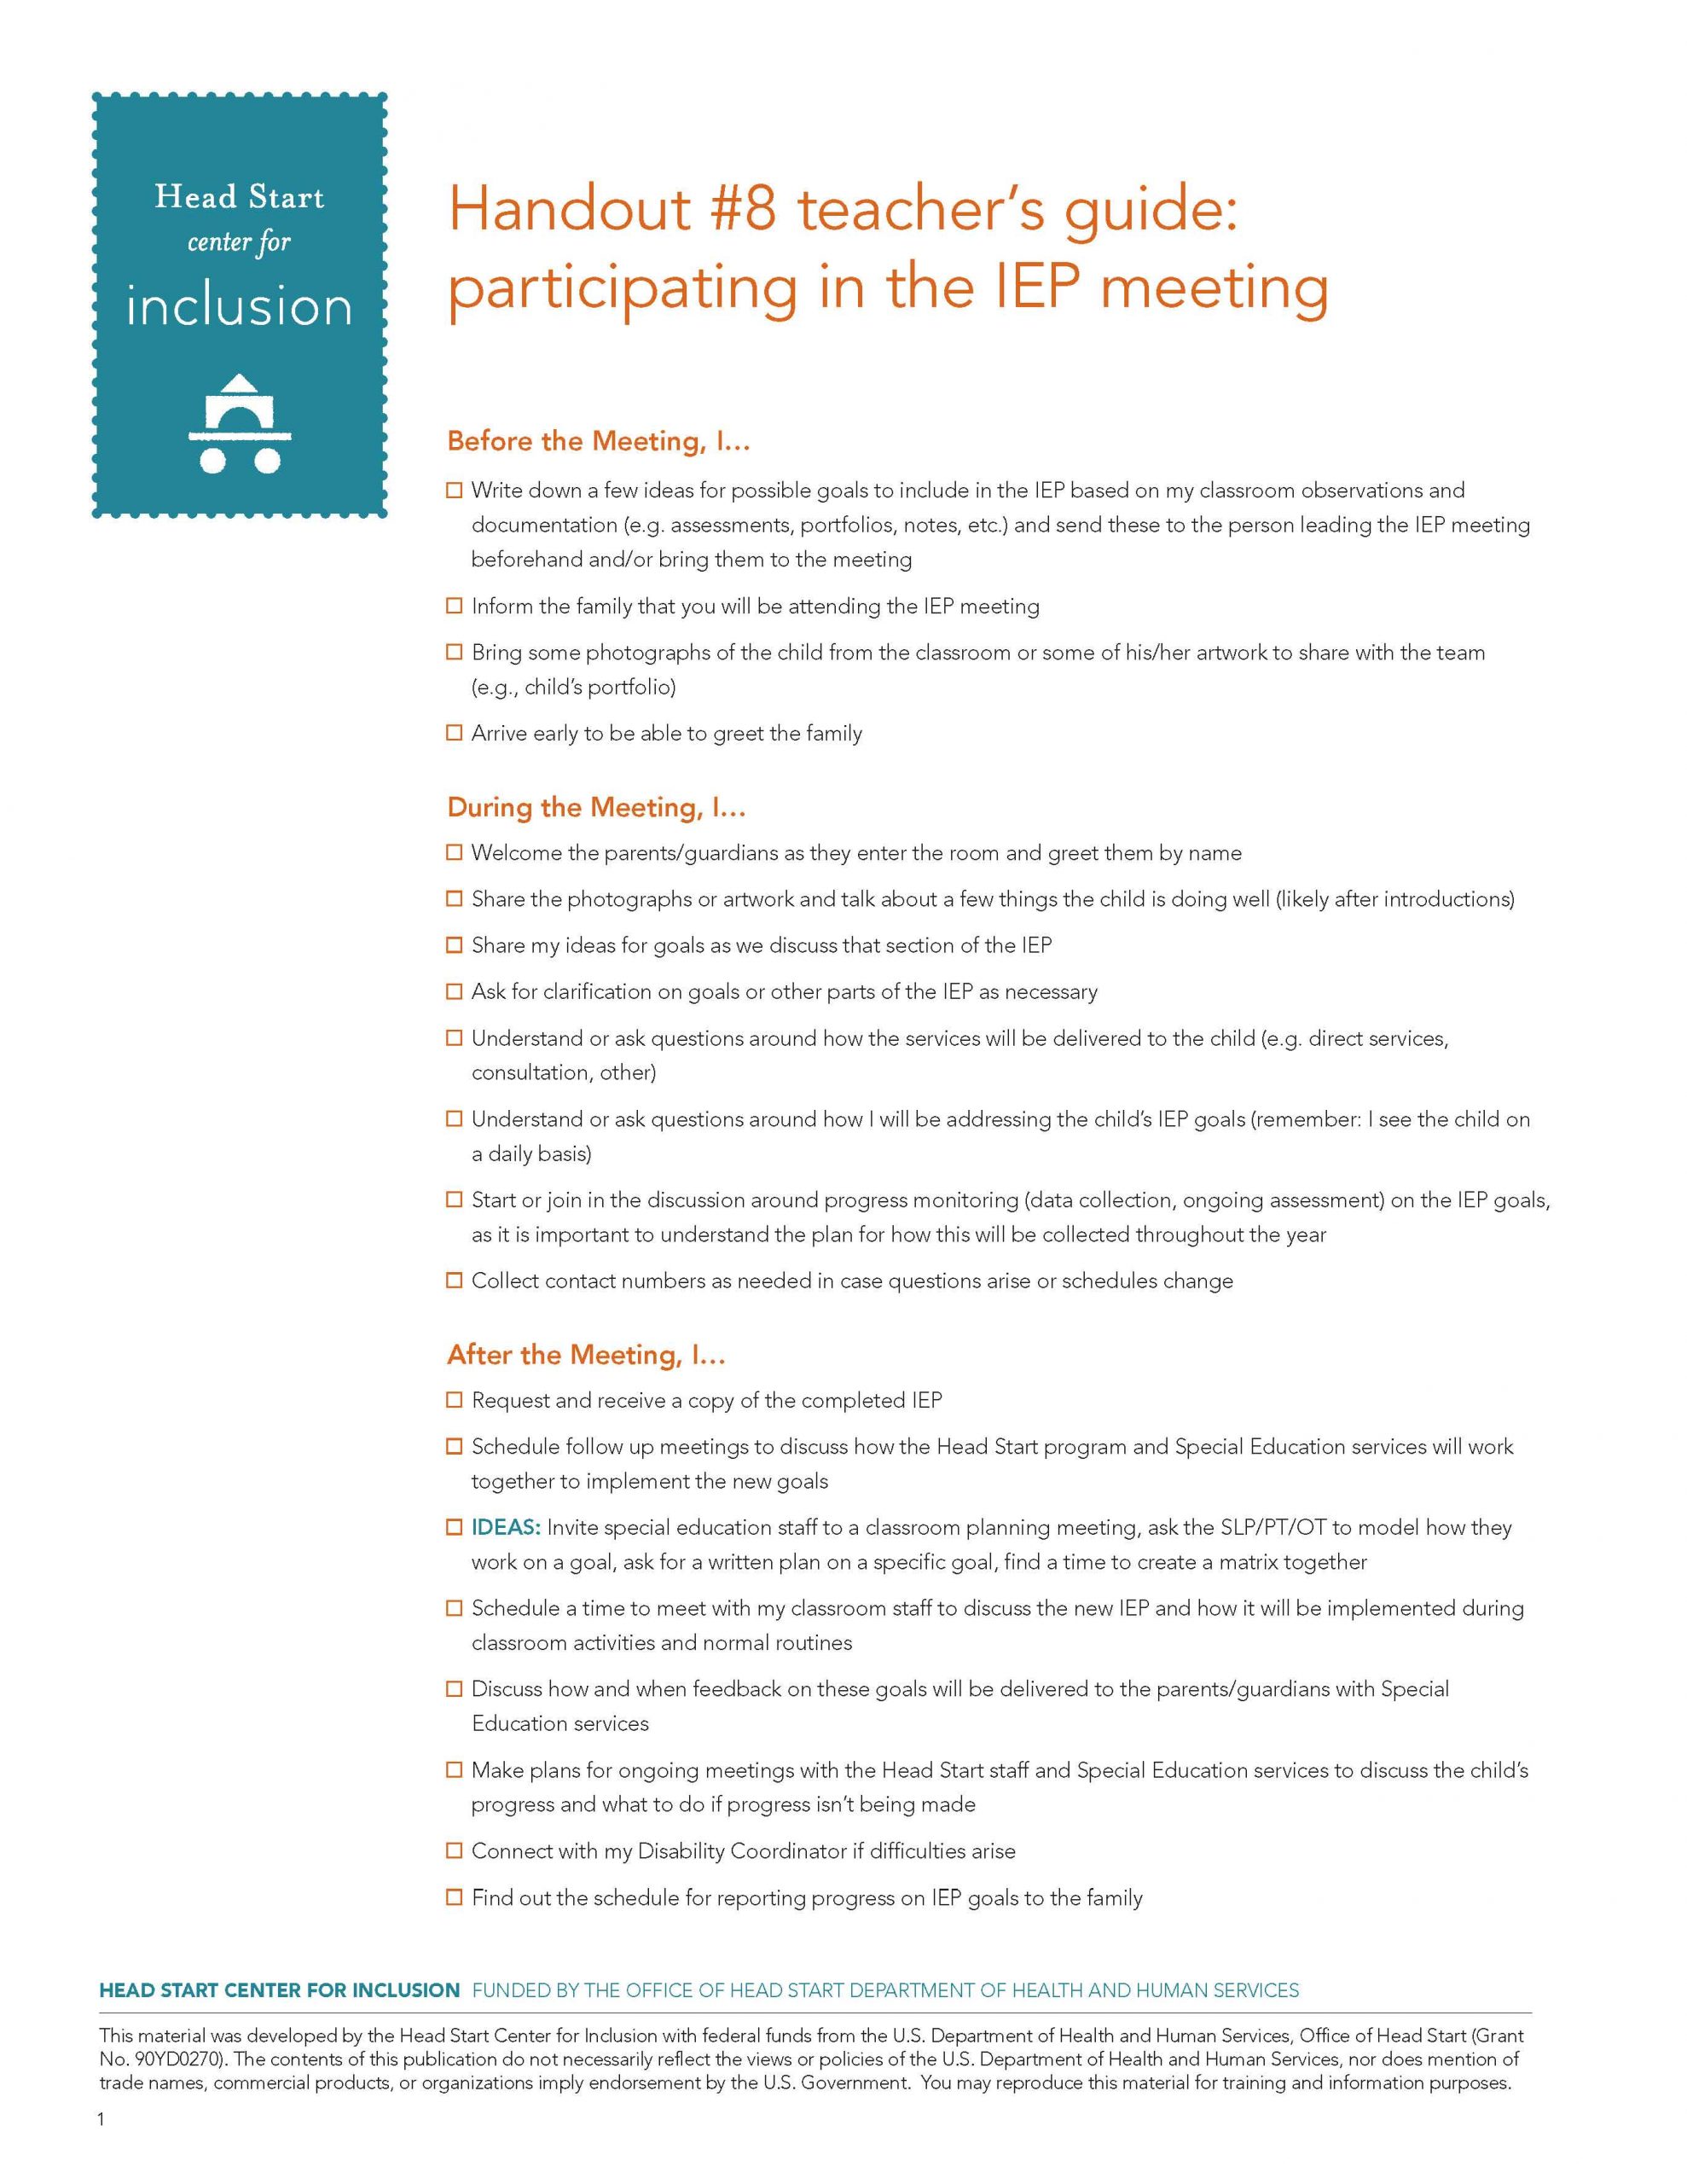 Teacher's Guide: Participating in the IEP Meeting